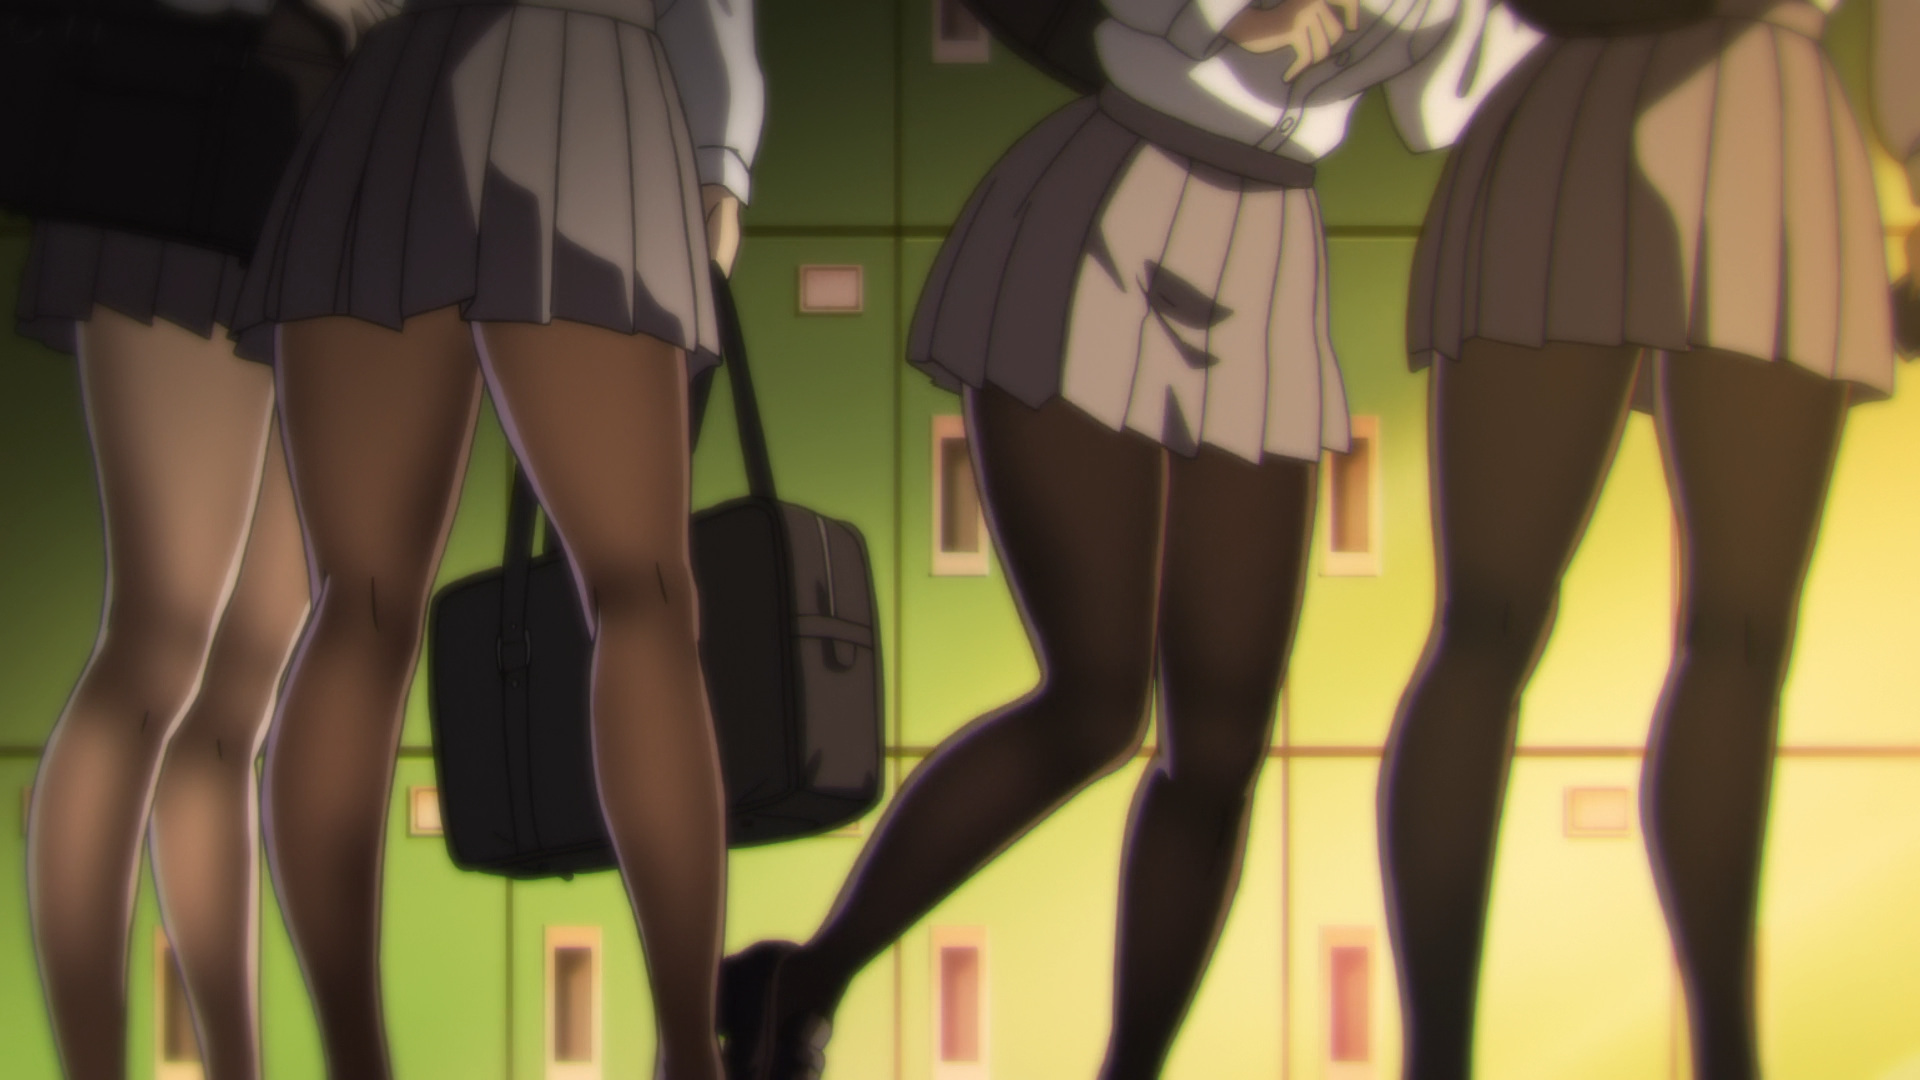 Where to Watch Miru Tights Anime & Is It Streaming on  Prime Video?